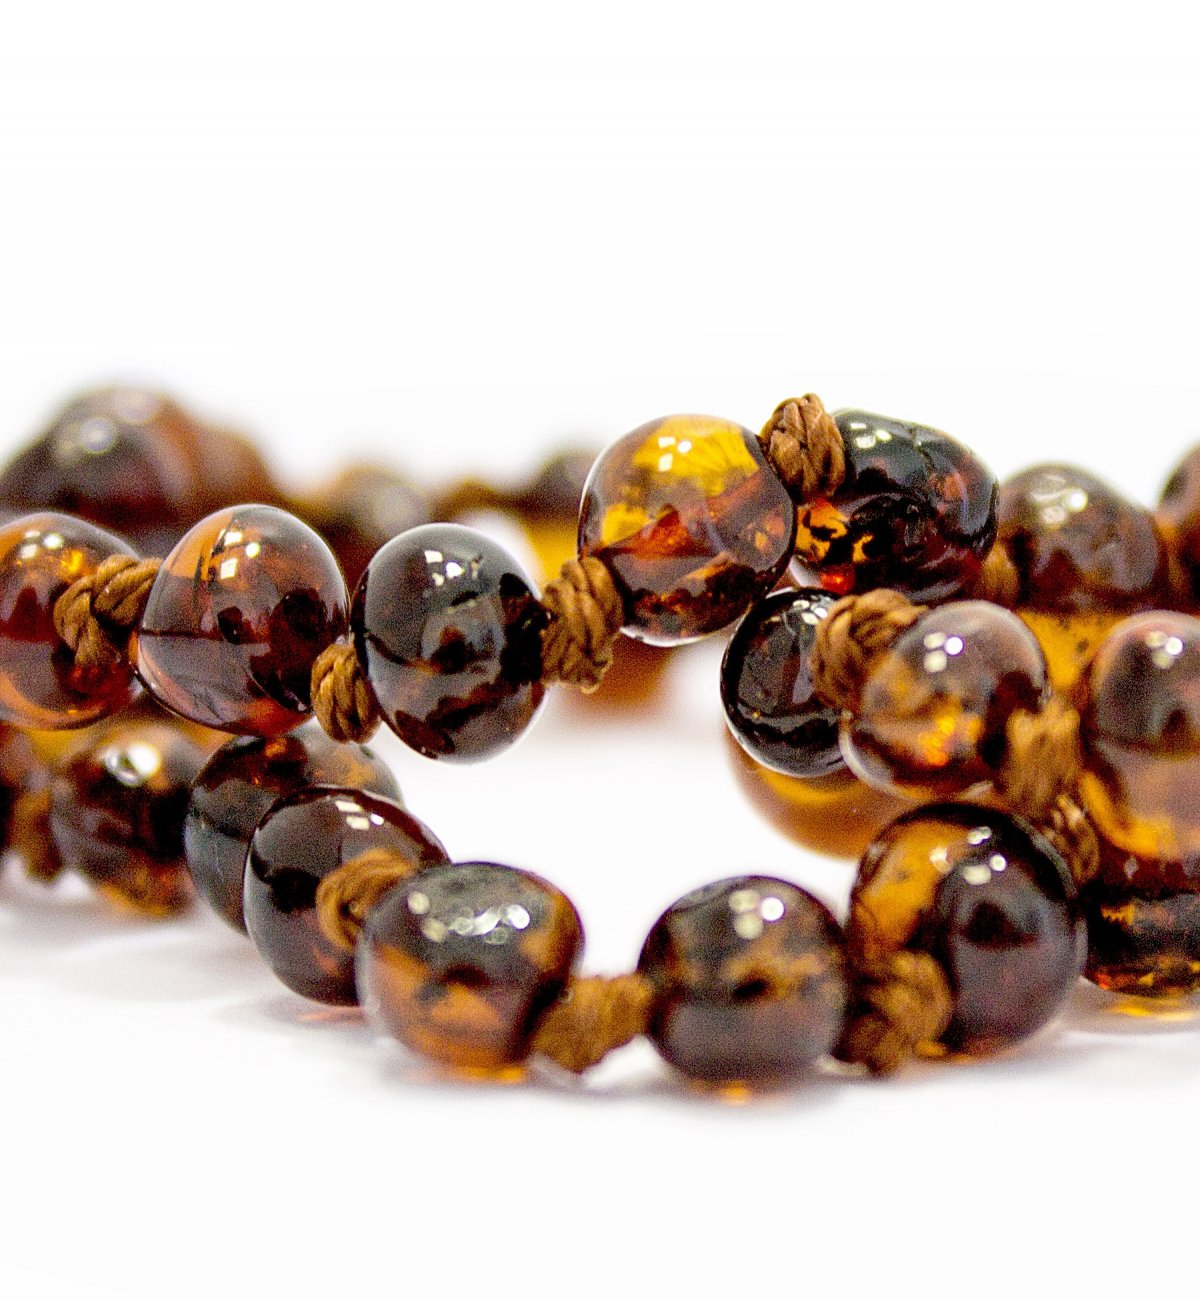 Unpolished amber baby necklace with small round beads and Safety Clasp